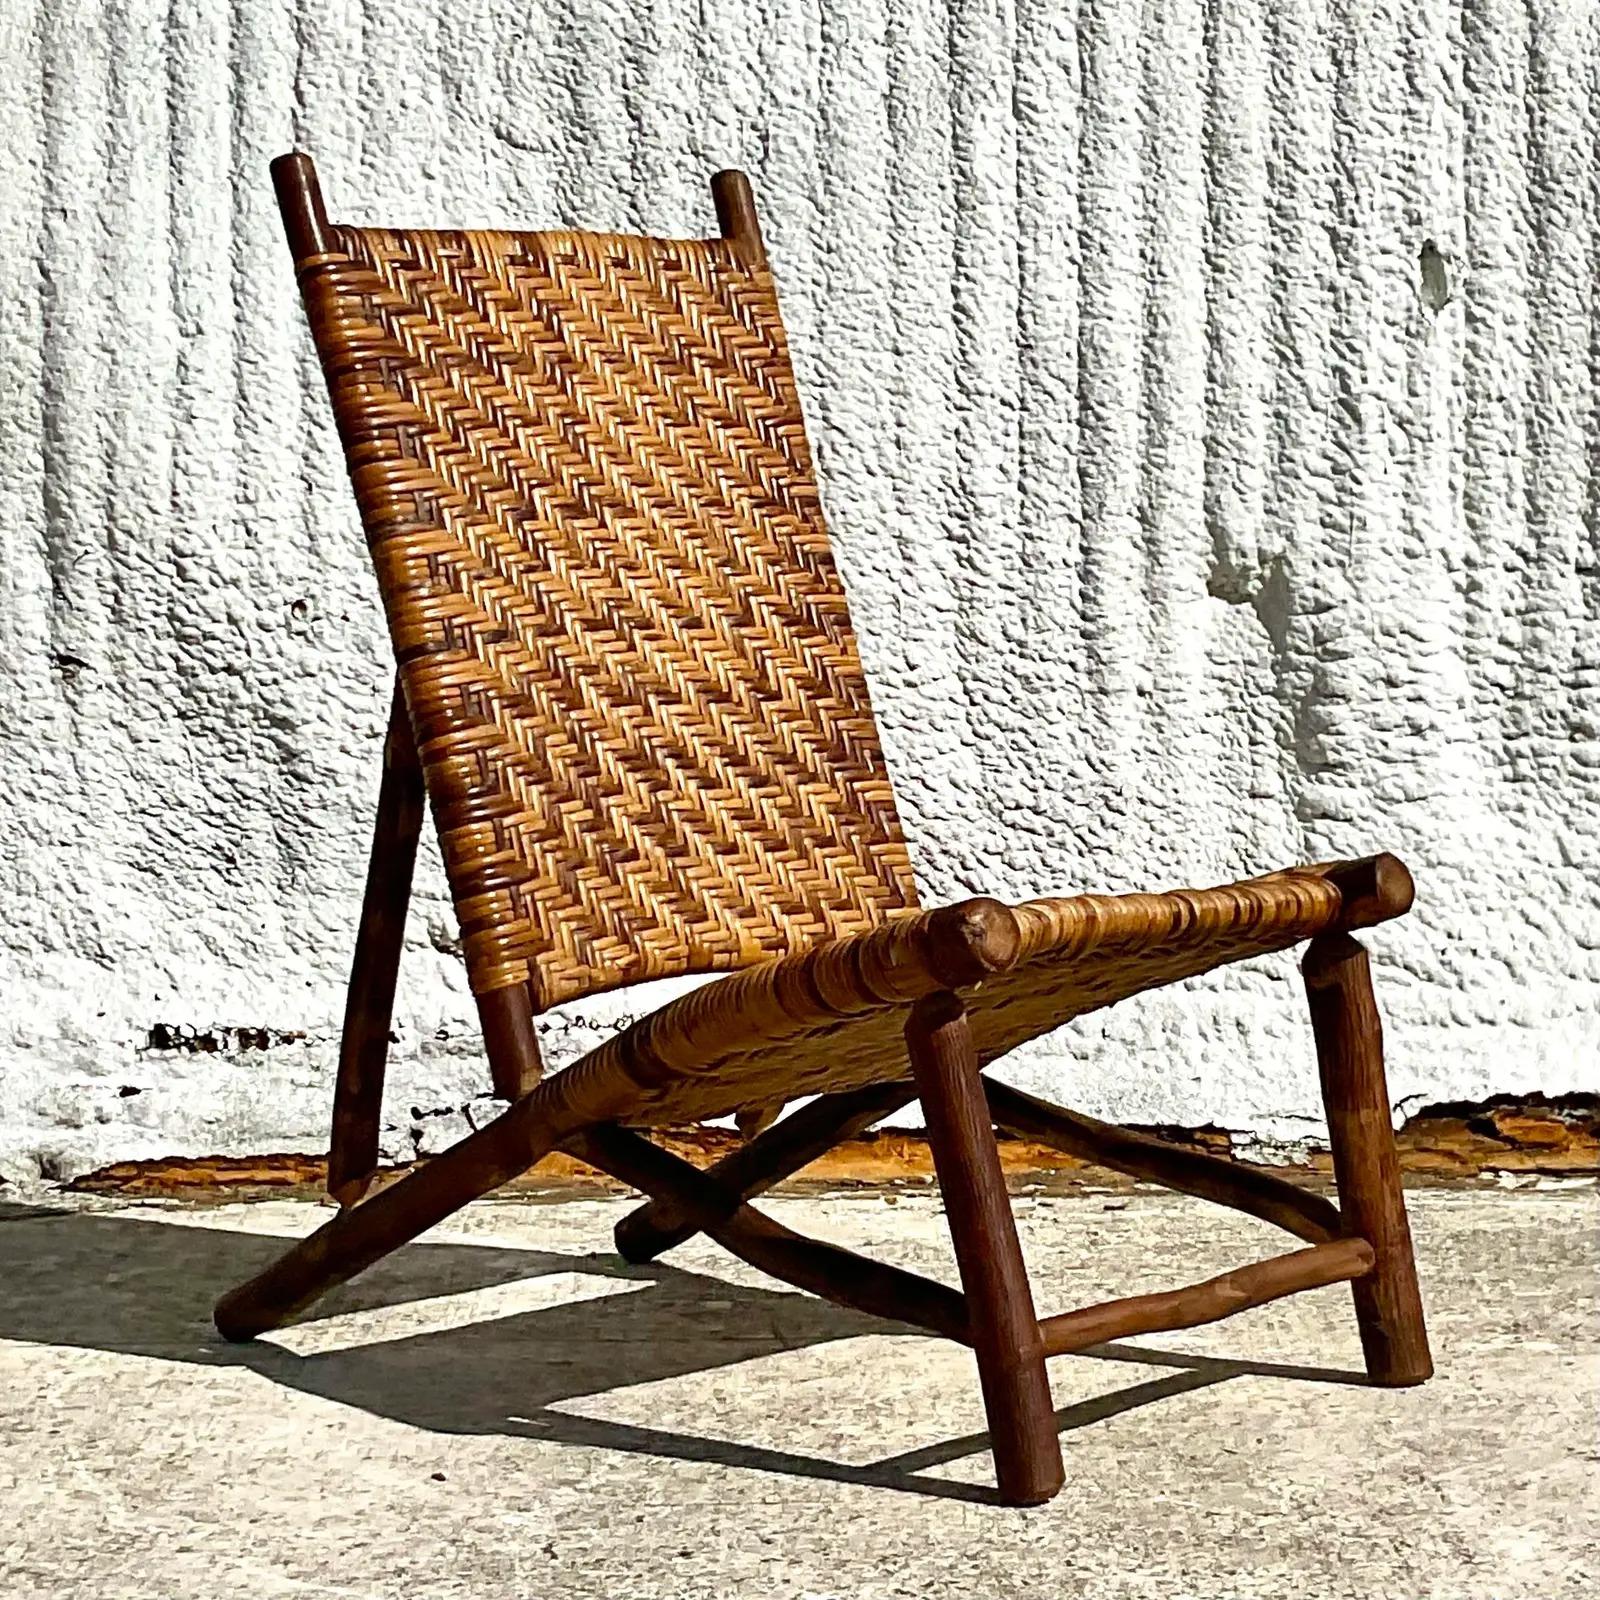 North American Vintage Boho Hickory Branch Woven Rattan Sling Chair